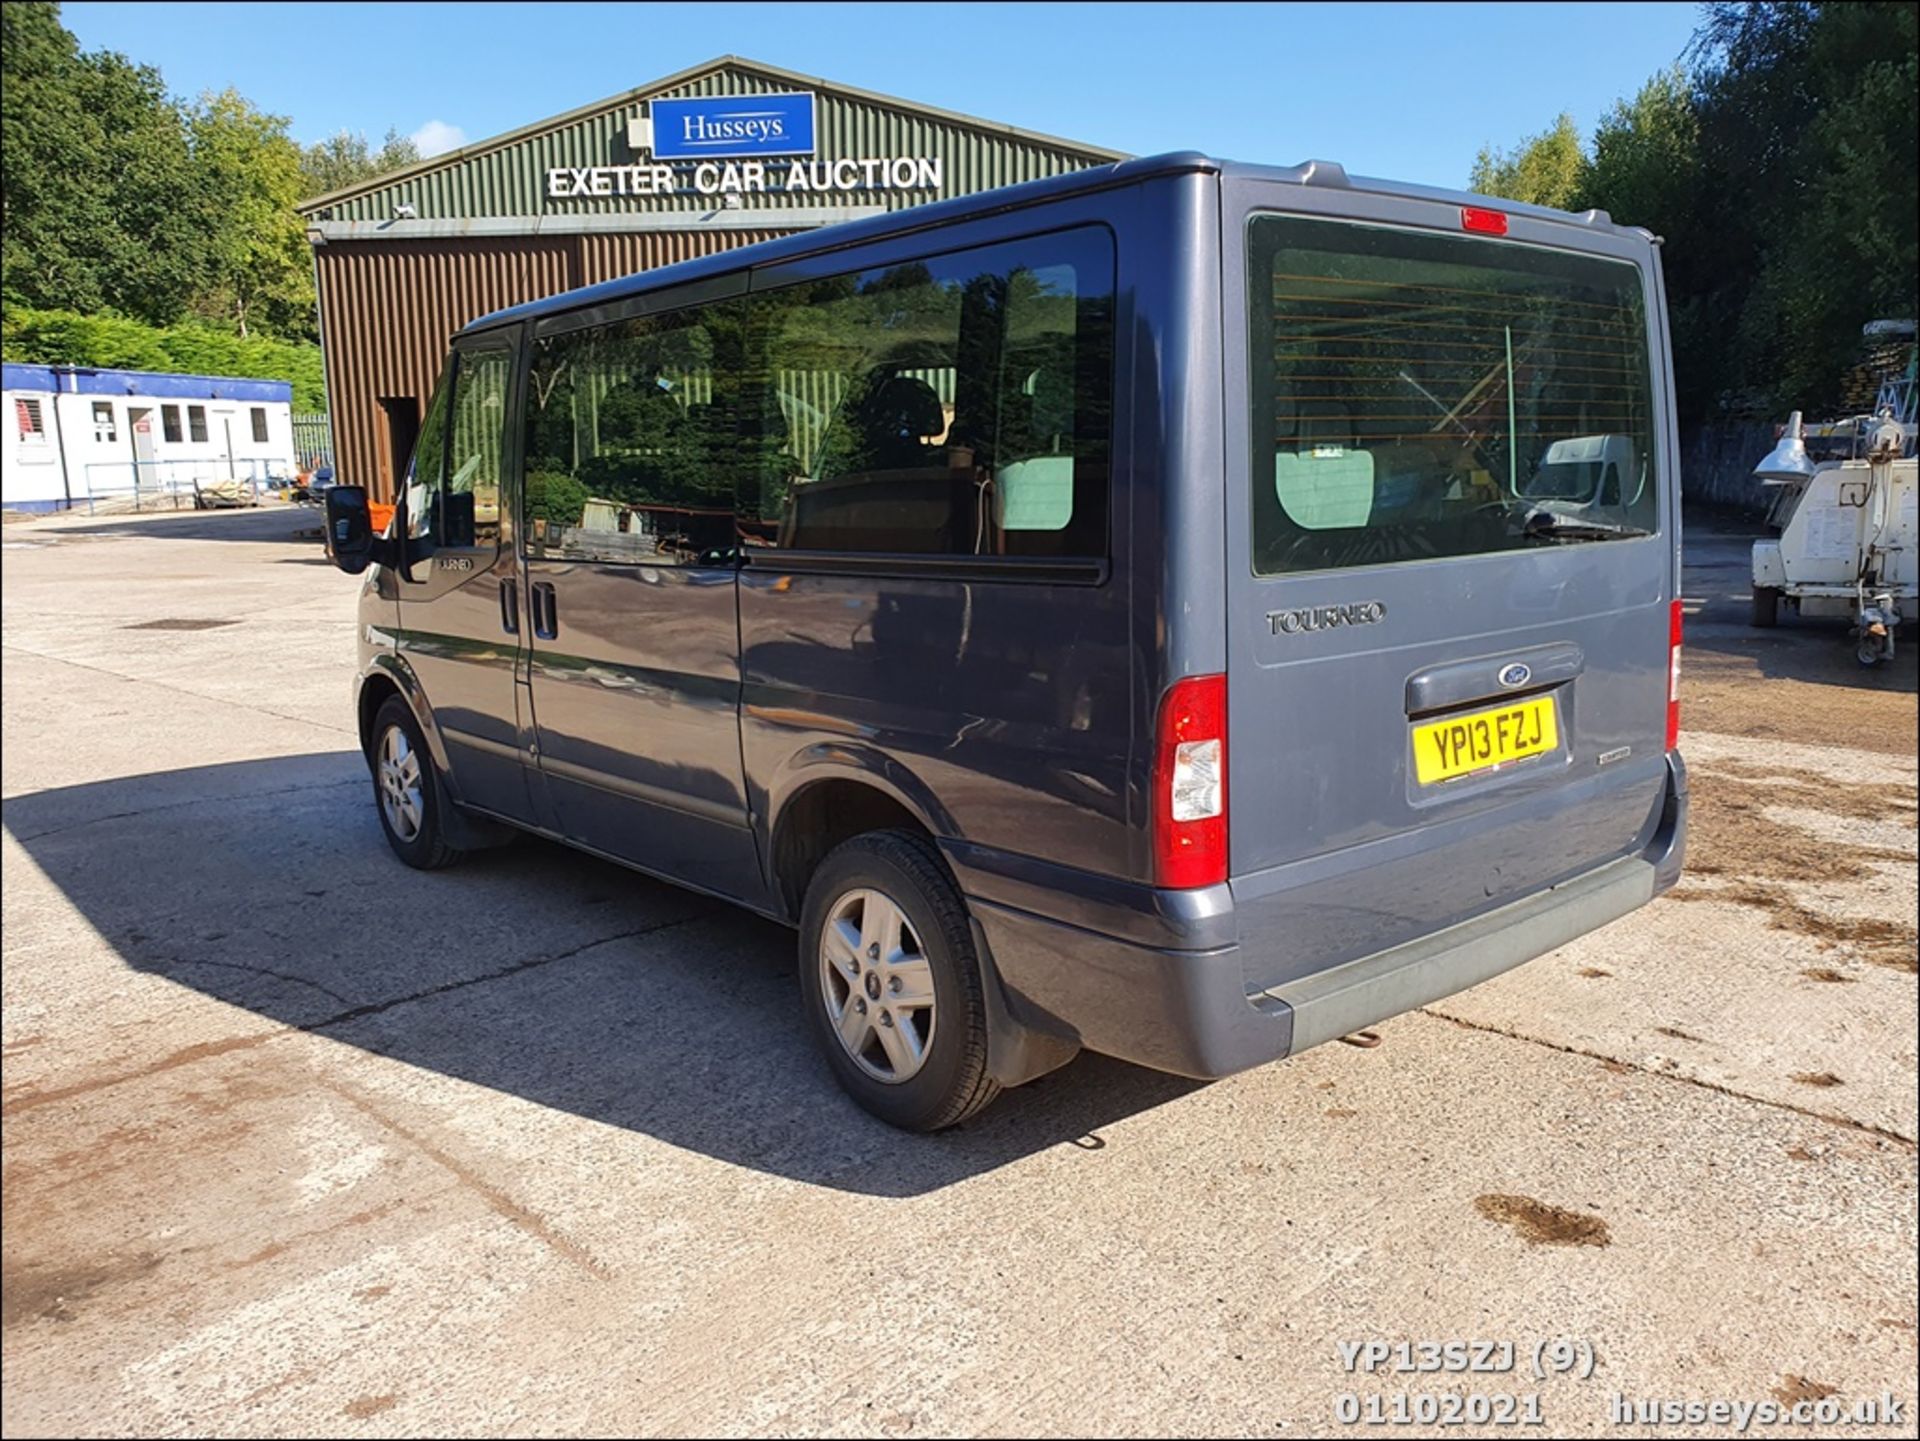 13/13 FORD TRANSIT 125 T280 FWD - 2198cc 5dr MPV (Grey) - Image 16 of 18